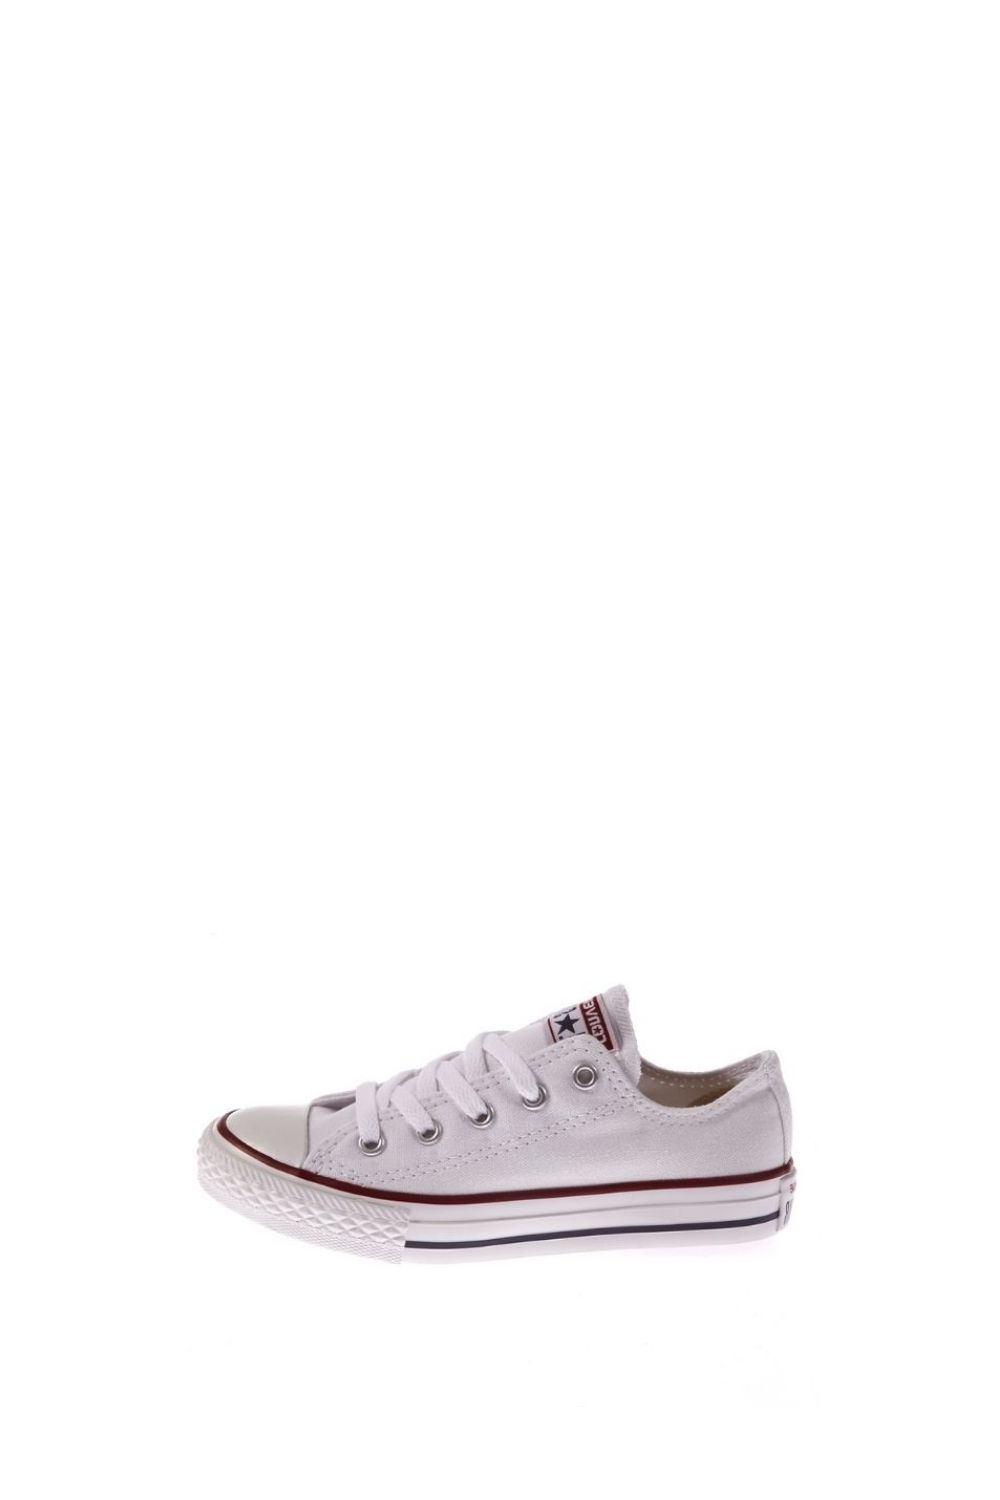 CONVERSE - Παιδικά παπούτσια Chuck Taylor λευκά Παιδικά/Girls/Παπούτσια/Sneakers